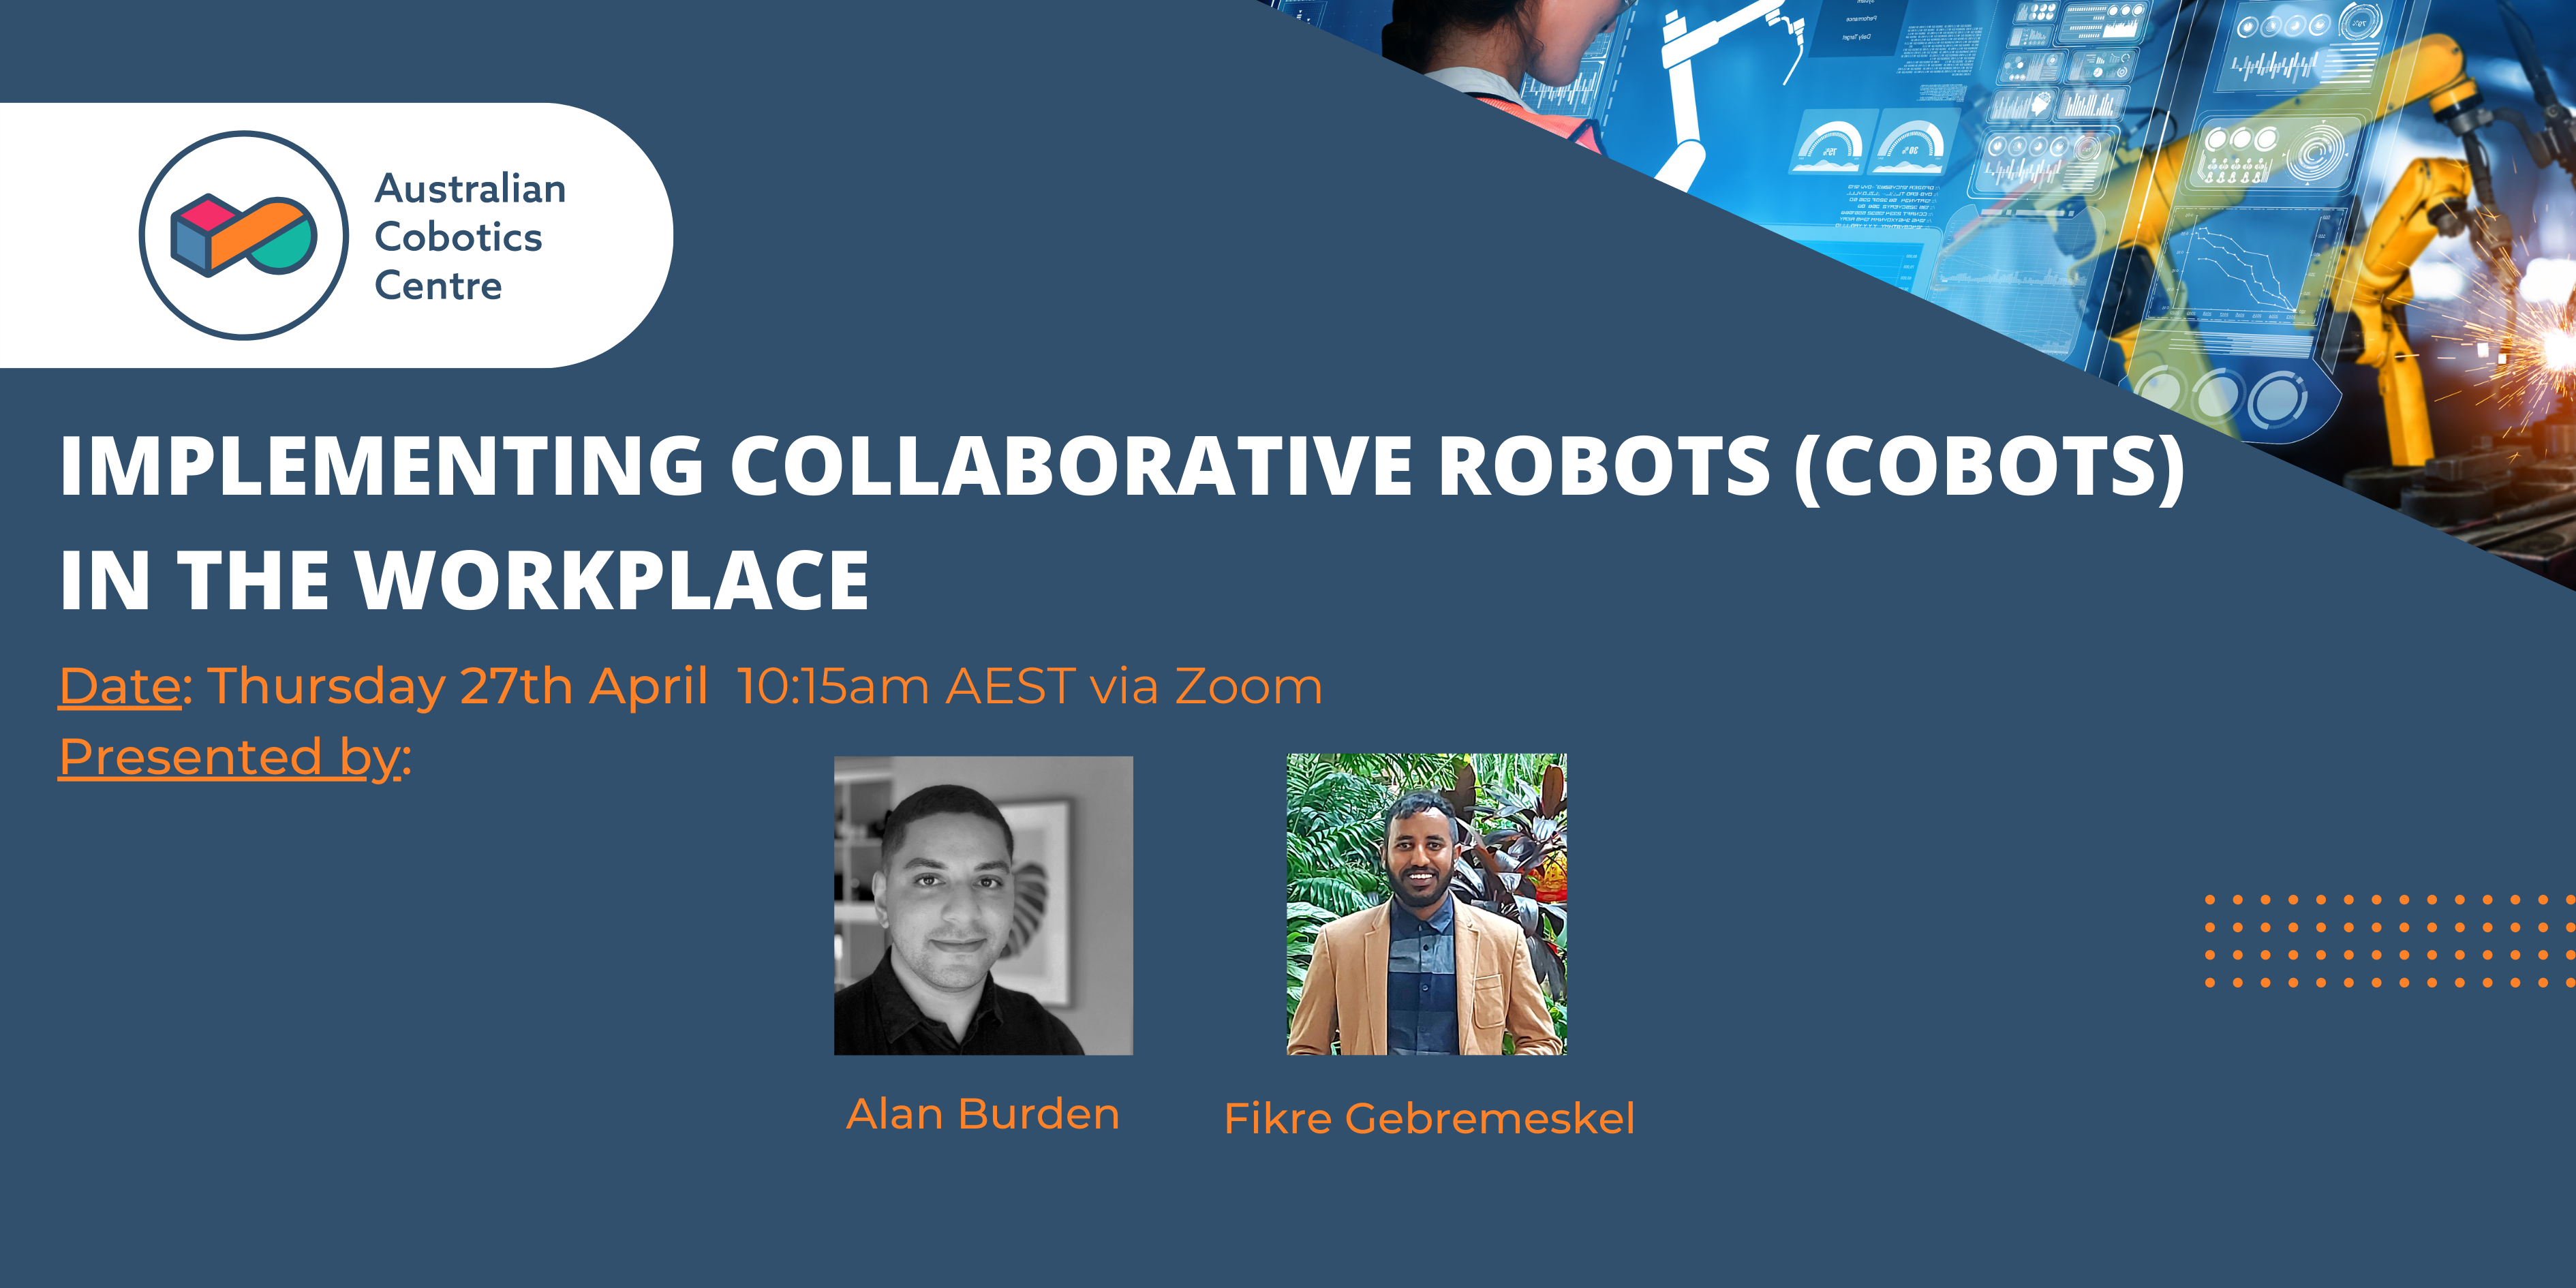 Implementing Collaborative Robots Cobots in the workplace seminar